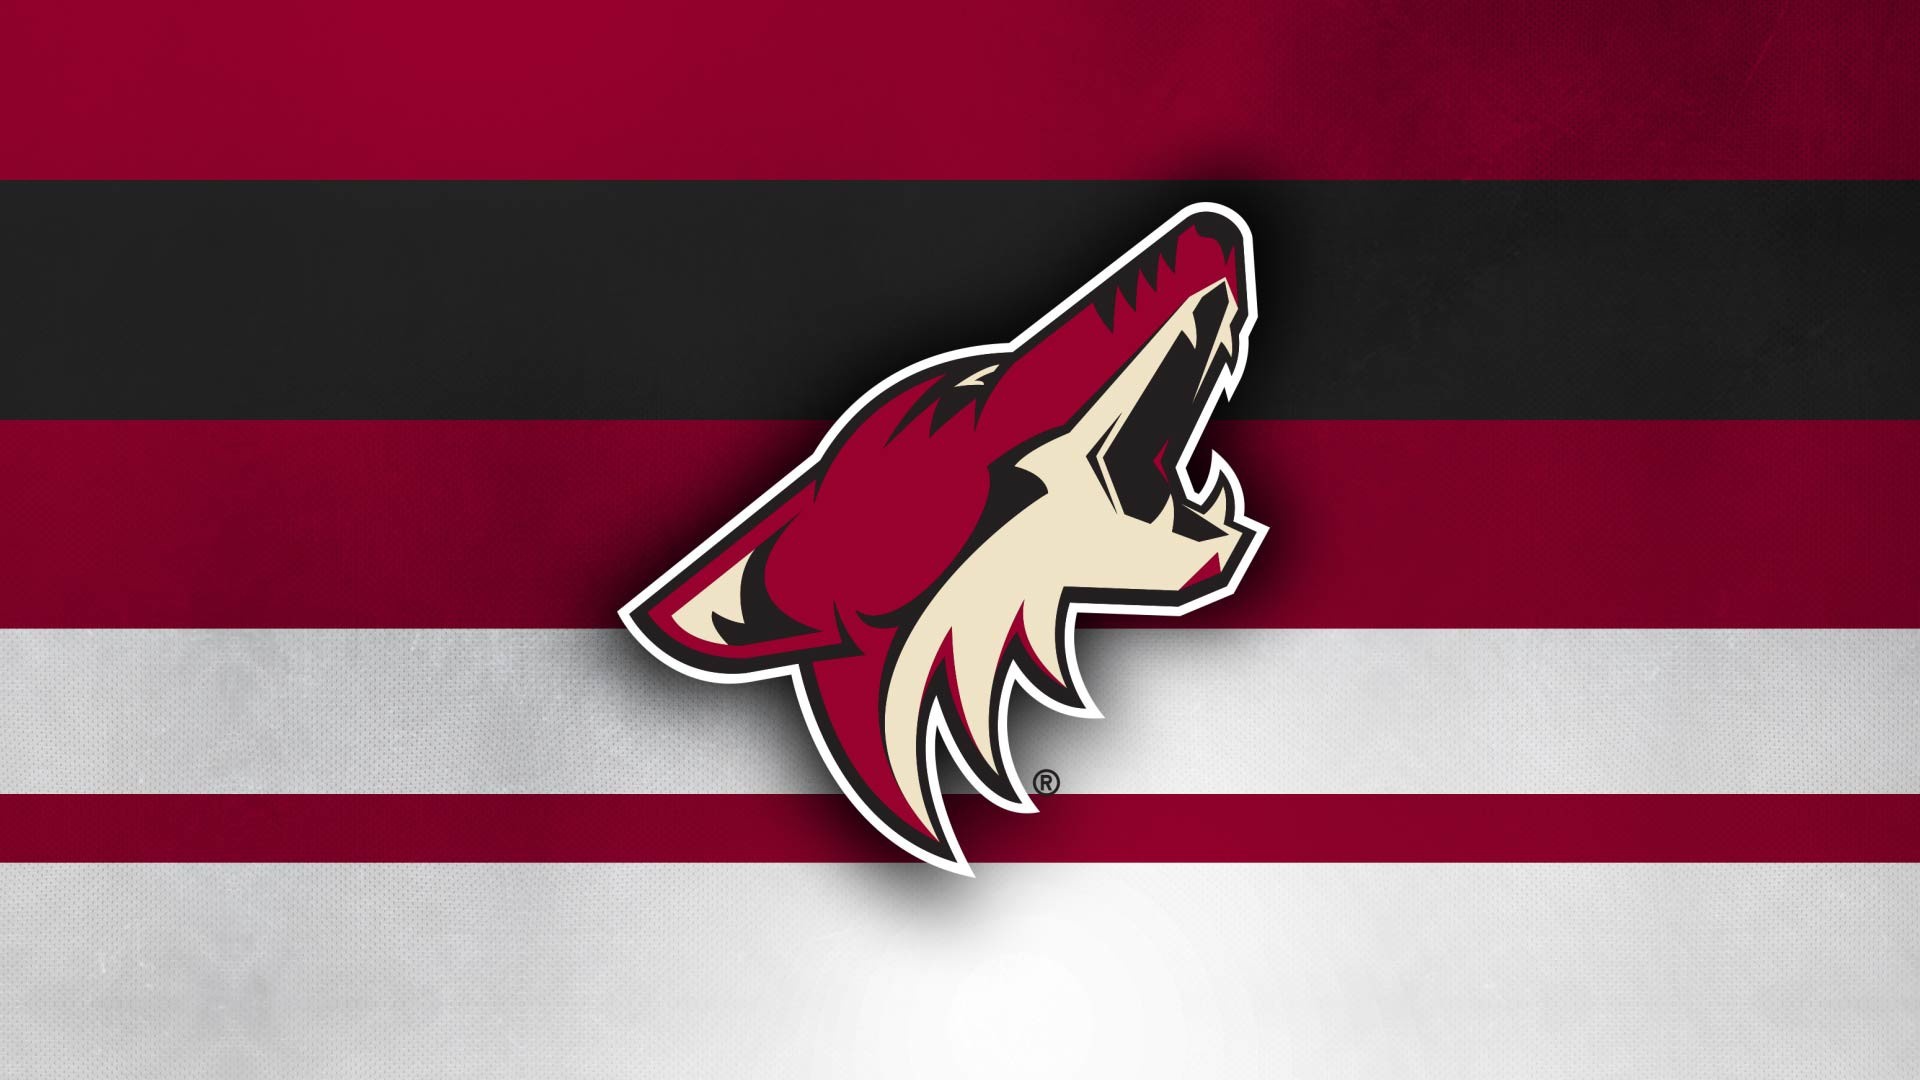 Arizona Coyotes wallpaper by Densports - Download on ZEDGE™